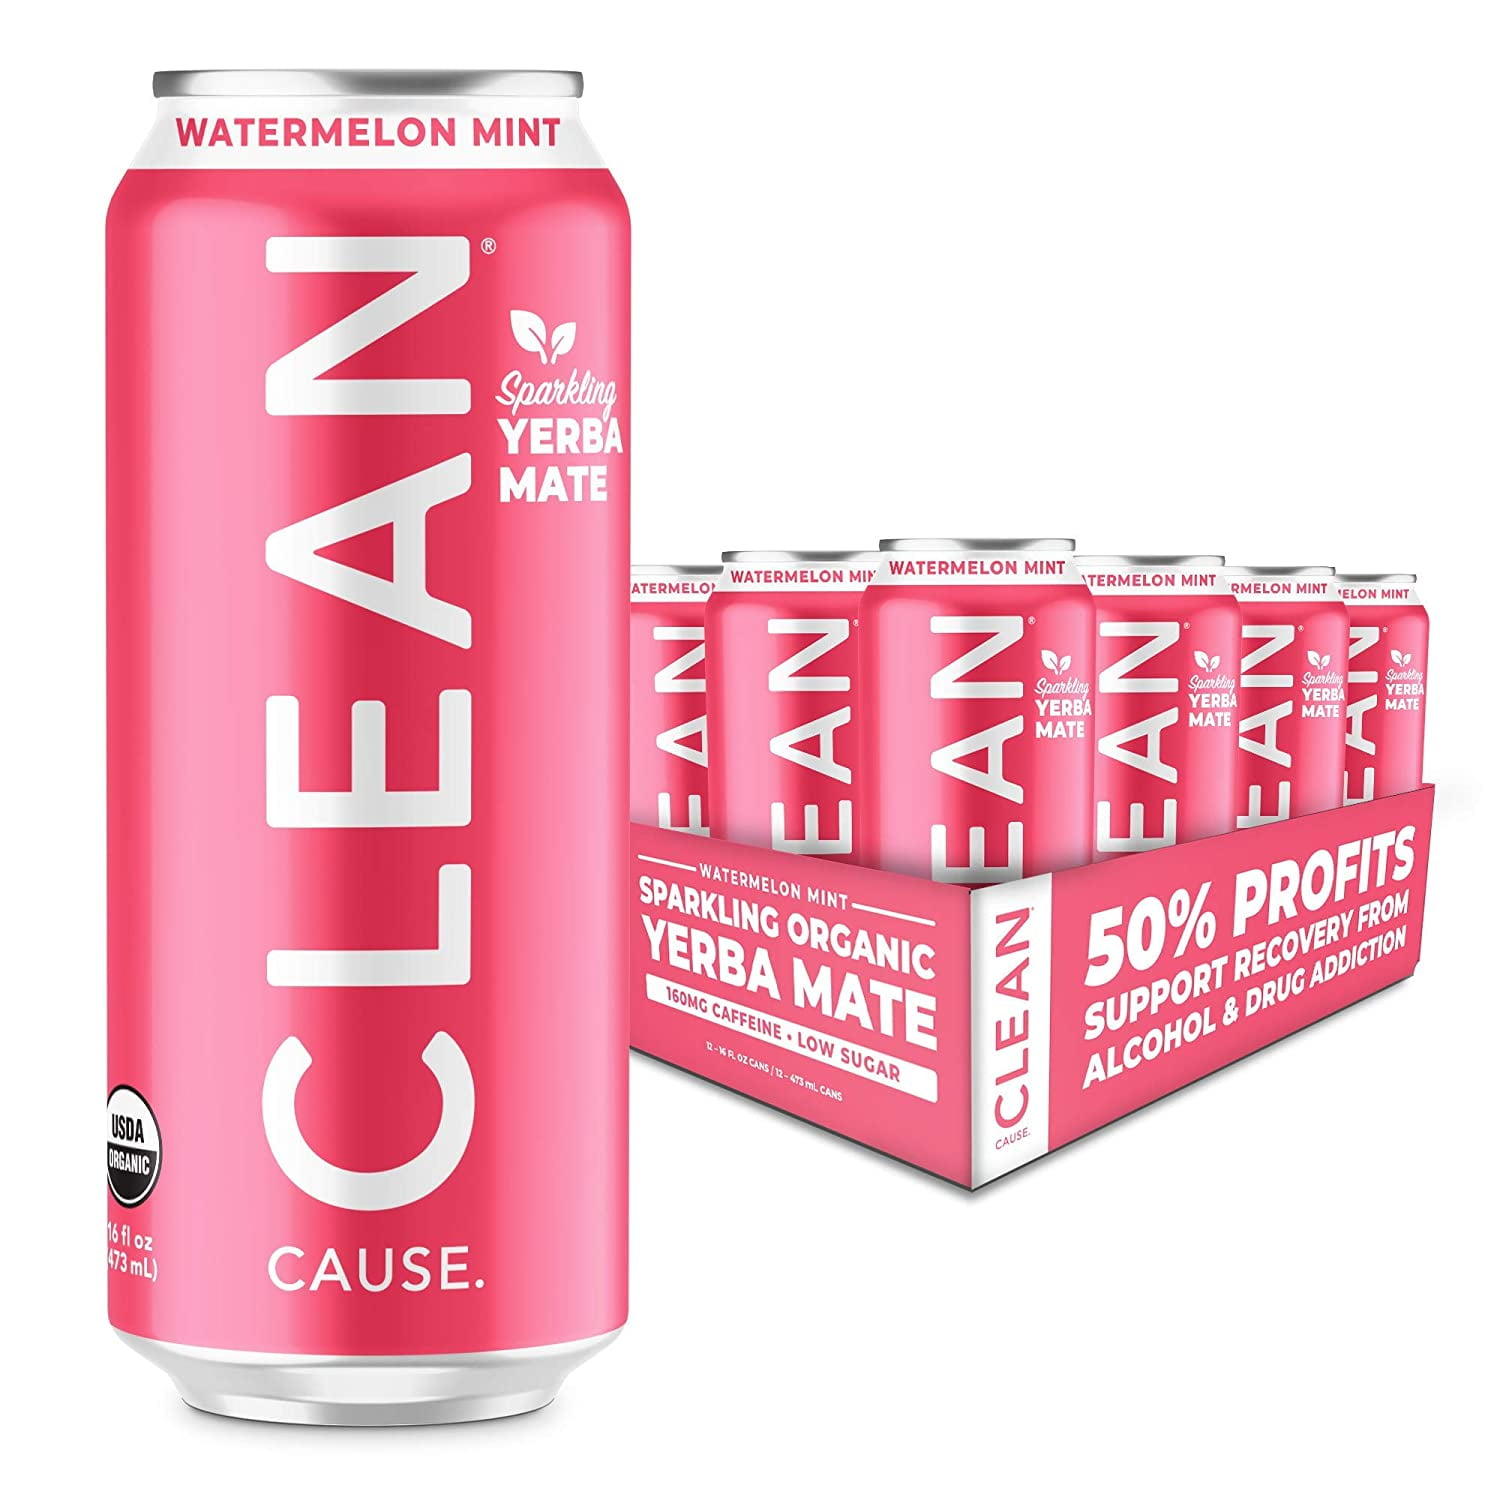 Photo 1 of (12 Cans) CLEAN Cause Watermelon Mint Organic Sparkling Yerba Mate Tea - Organic, Low Calorie Low Sugar (160mg Caffeine), 16 Fl Oz - 50 PROFITS SUPPORT RECOVERY FROM ALCOHOL DRUG ADDICTION